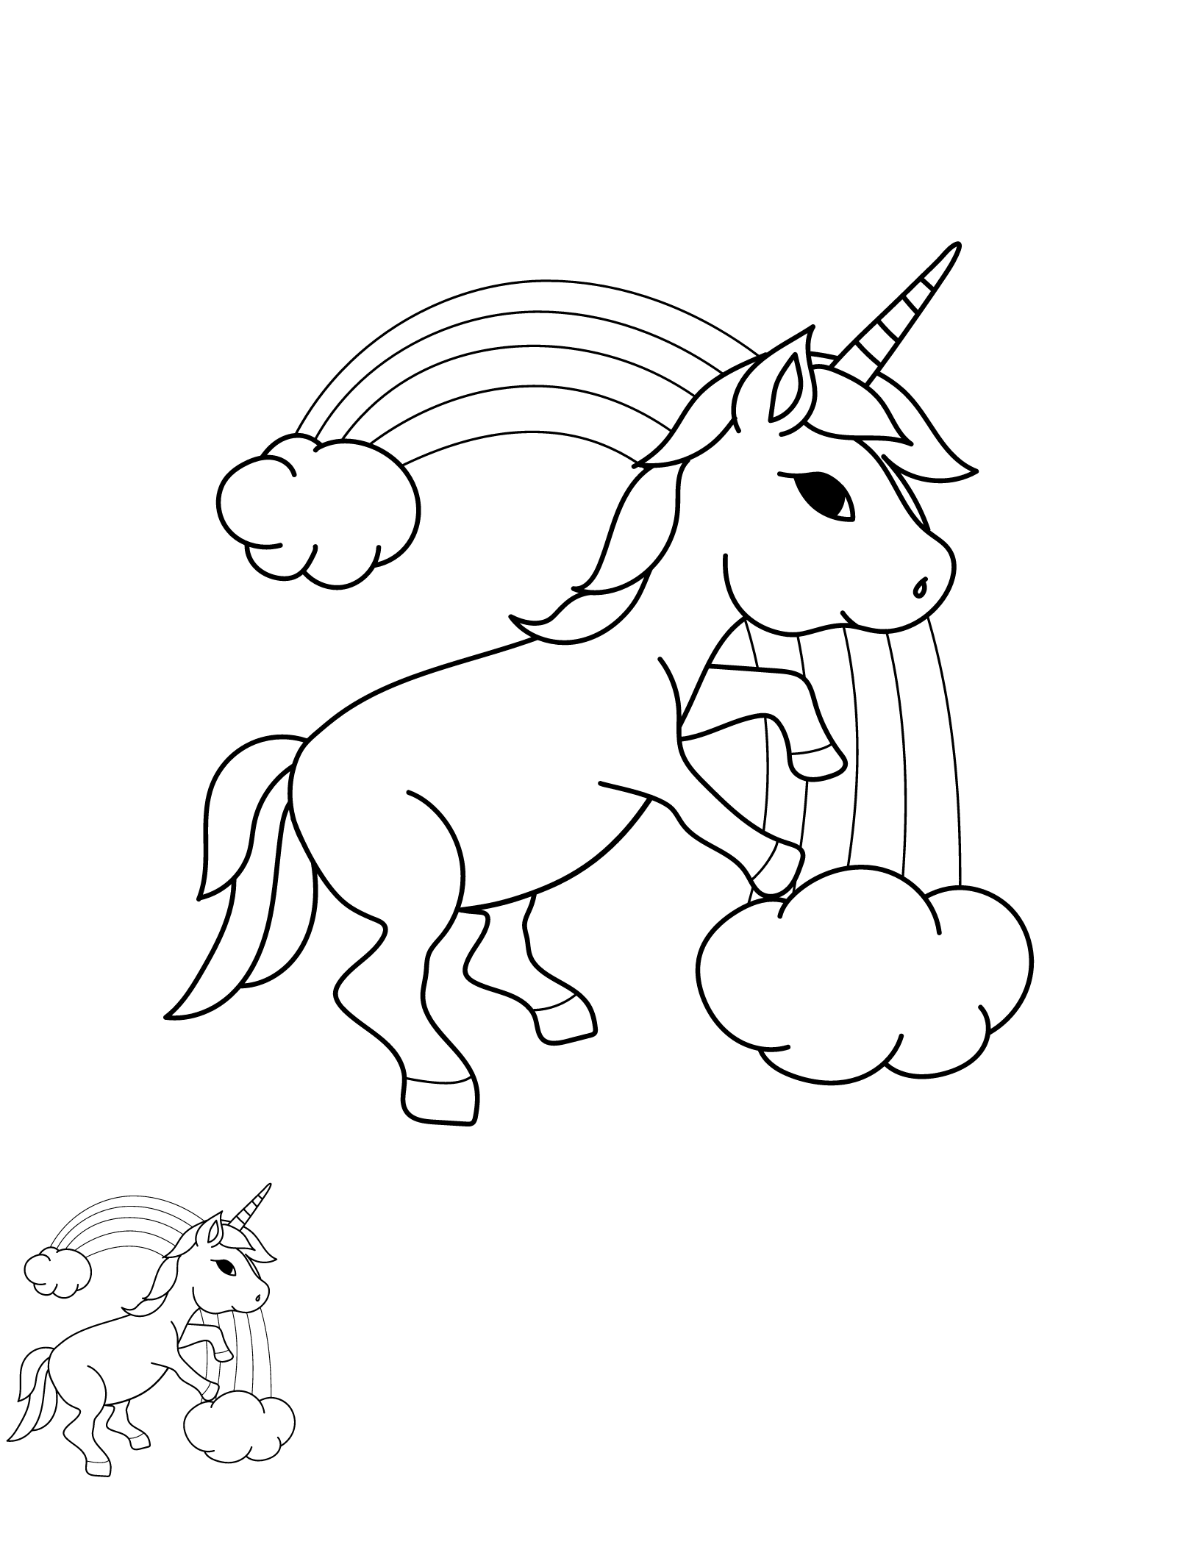 Rainbow Unicorn Coloring Page Template